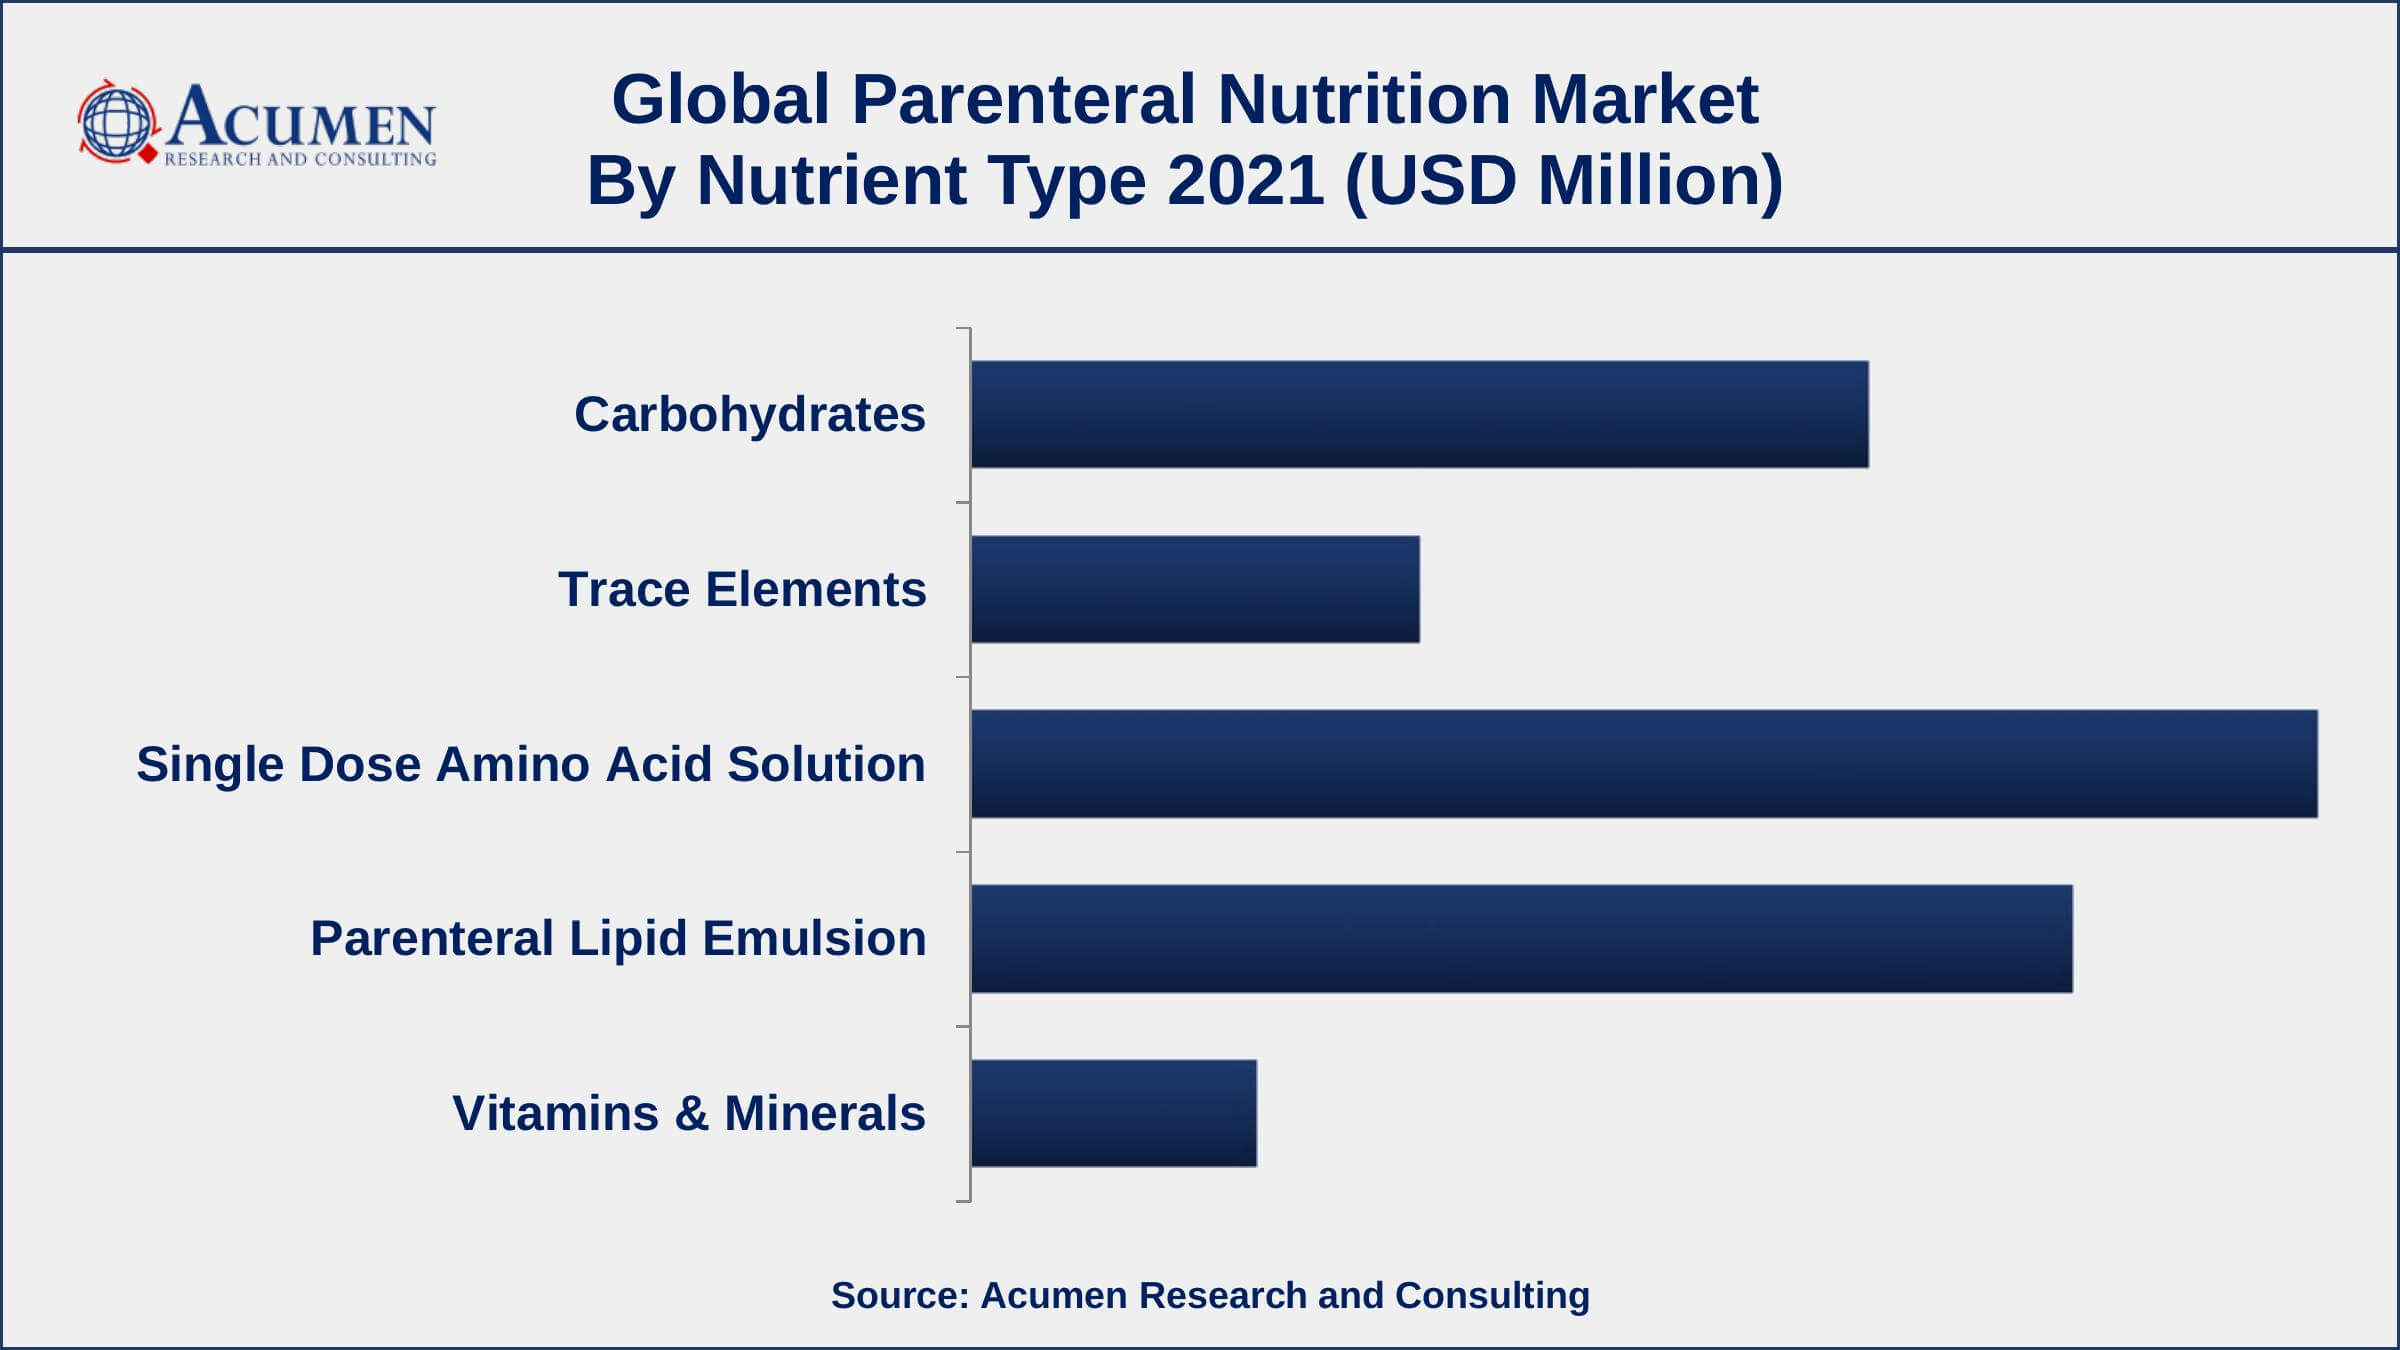 By nutrient type, the single dose amino acid solution segment has accounted market share of over 33% in 2021